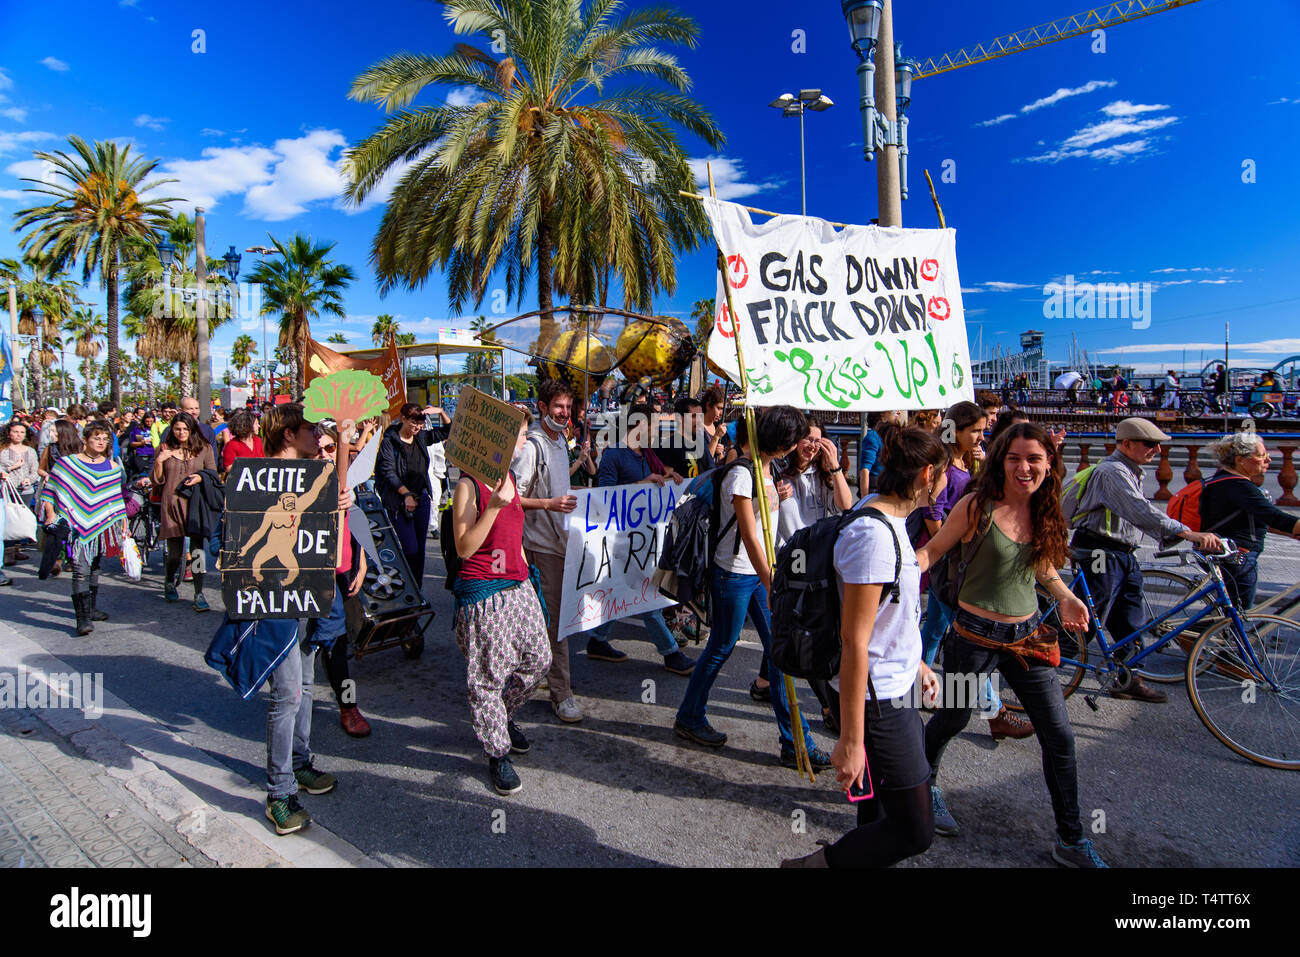 People protesting against air pollution and climate change on street in Barcelona, Spain Stock Photo